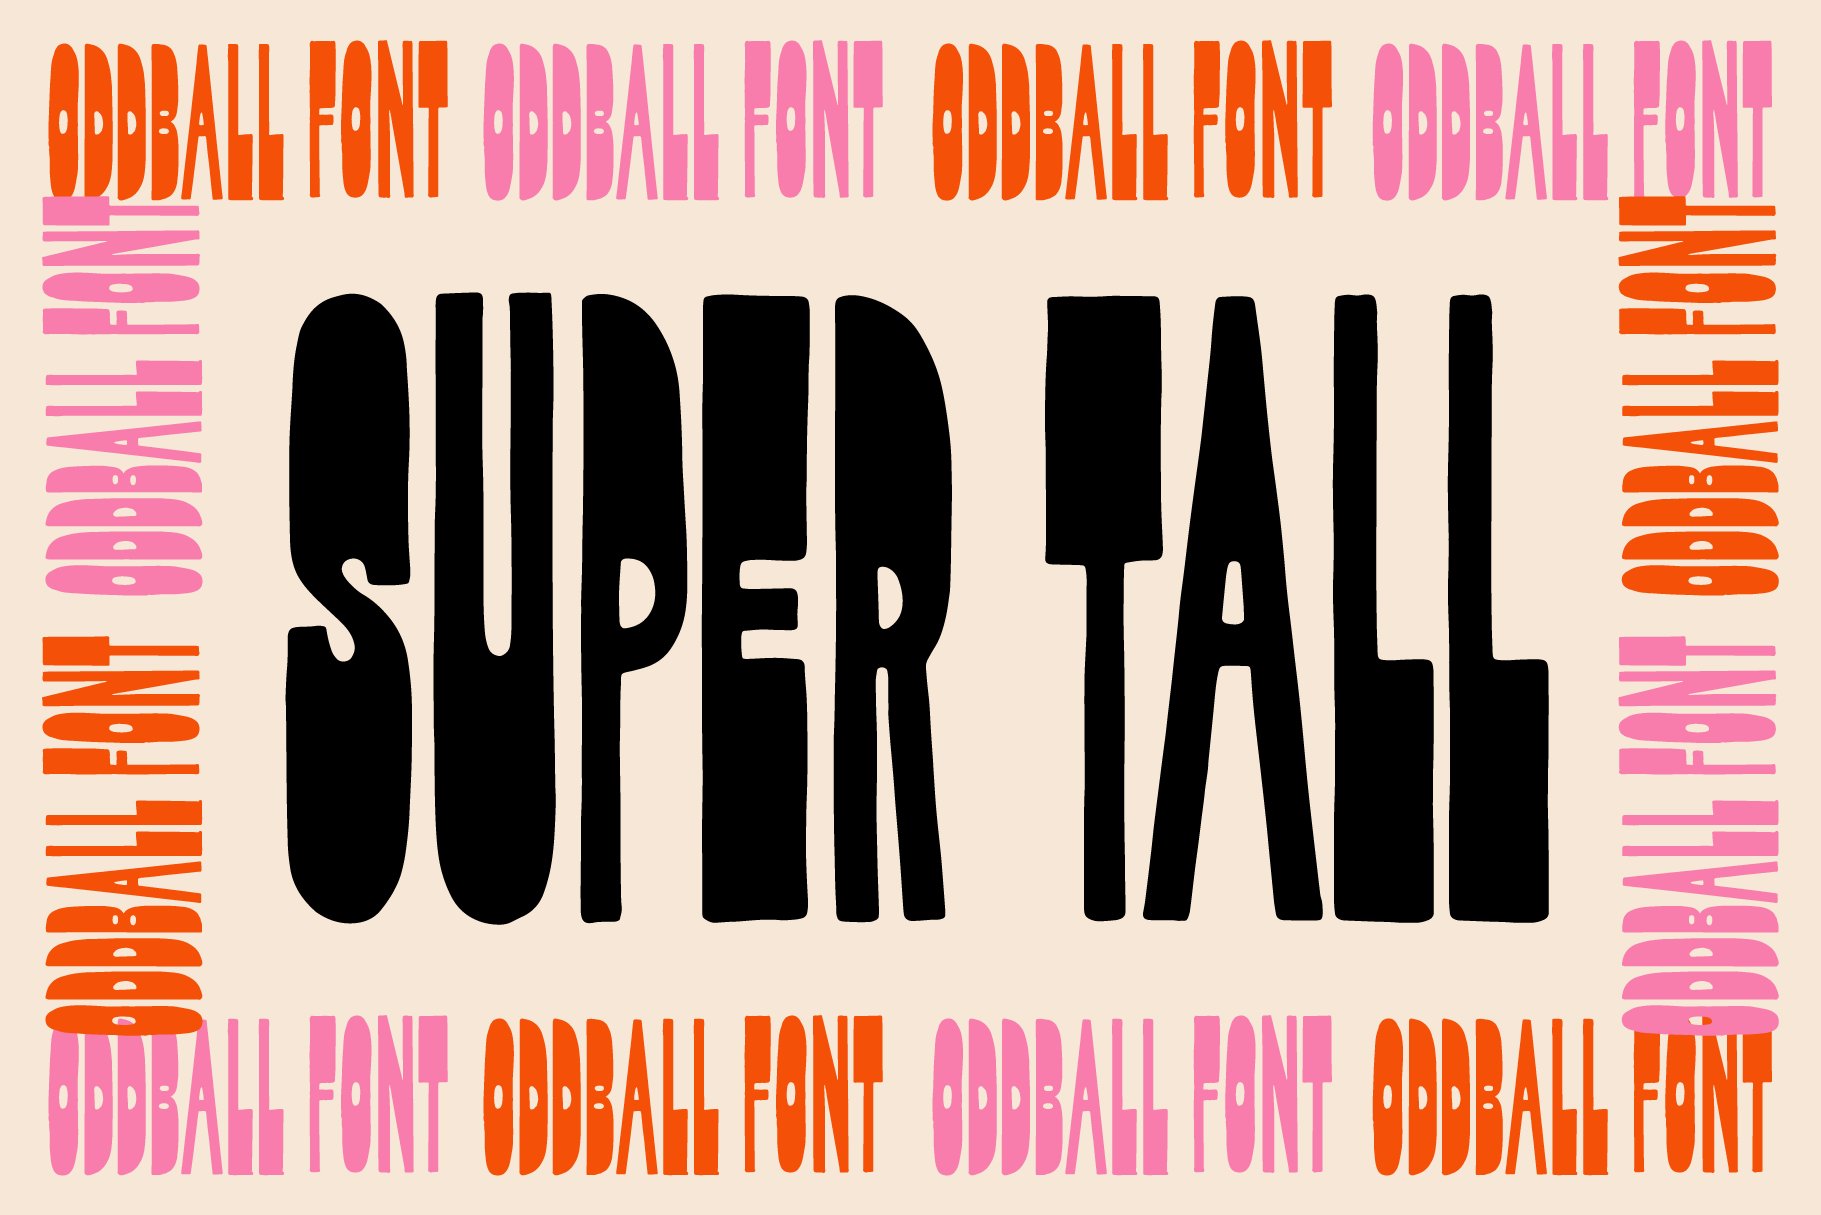 Oddball Super Tall! Hand-lettered! cover image.